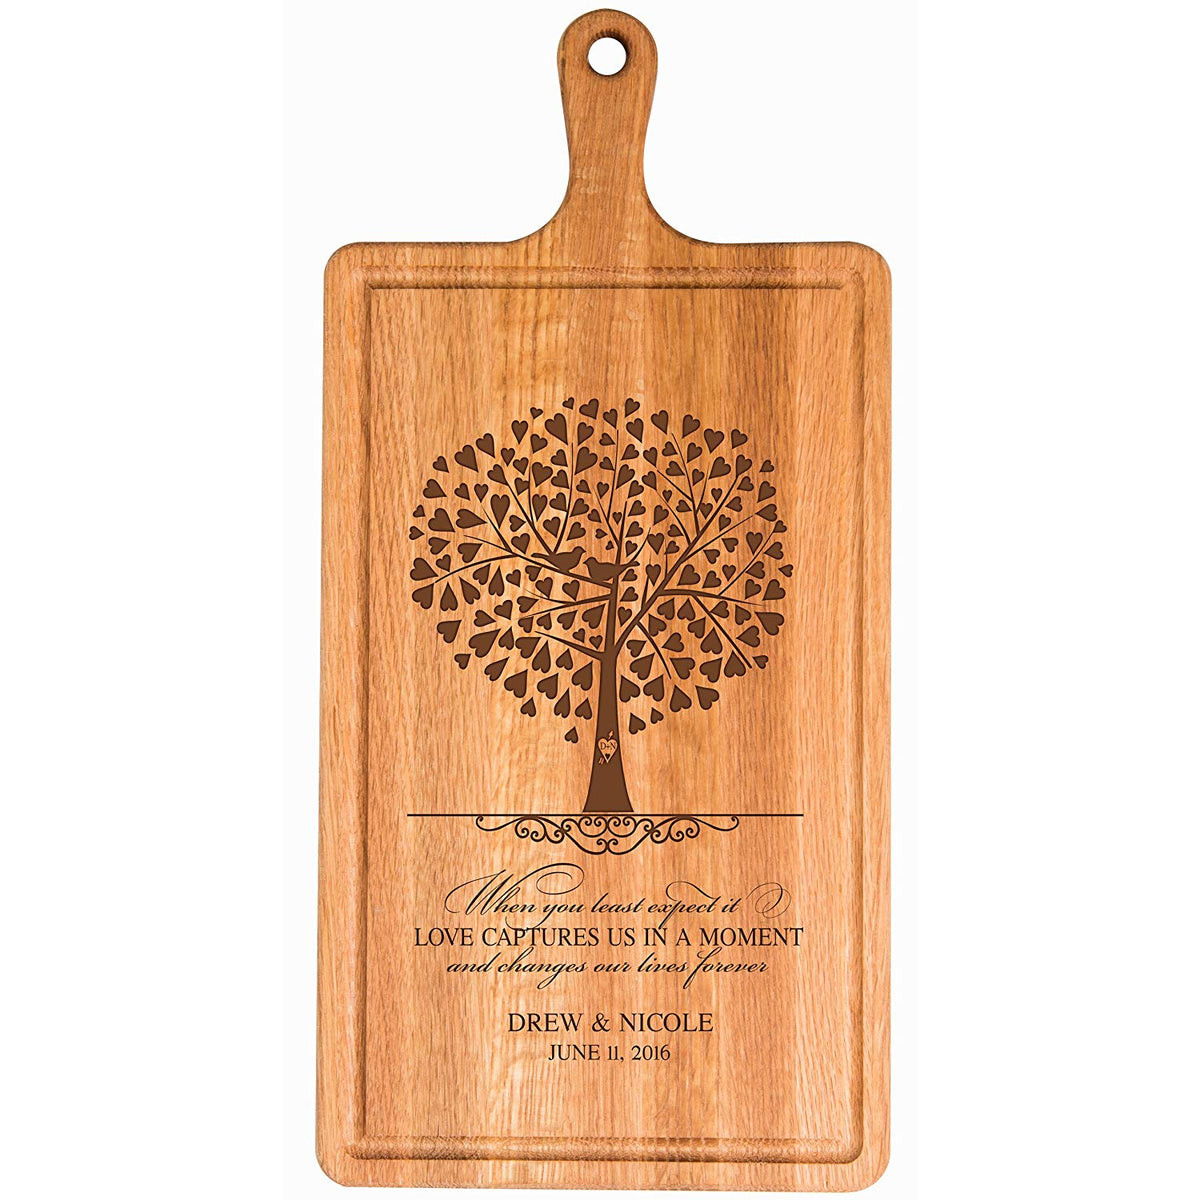 Personalized Anniversary Cherry Cutting Board - LifeSong Milestones